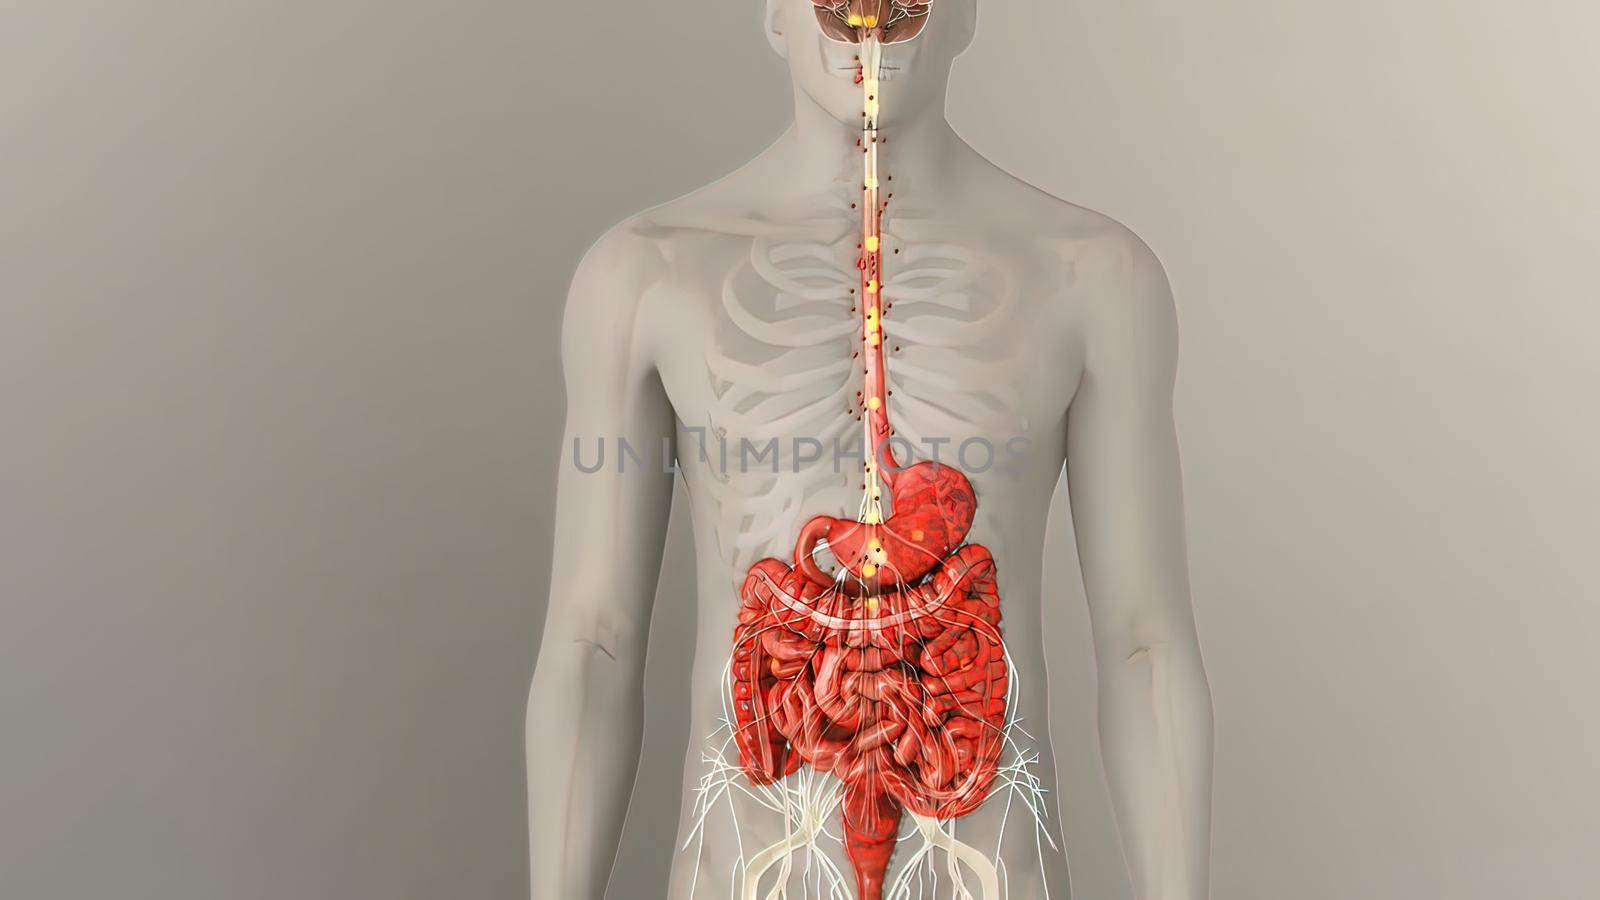 Anatomy of human digestive system guts and stomach by creativepic